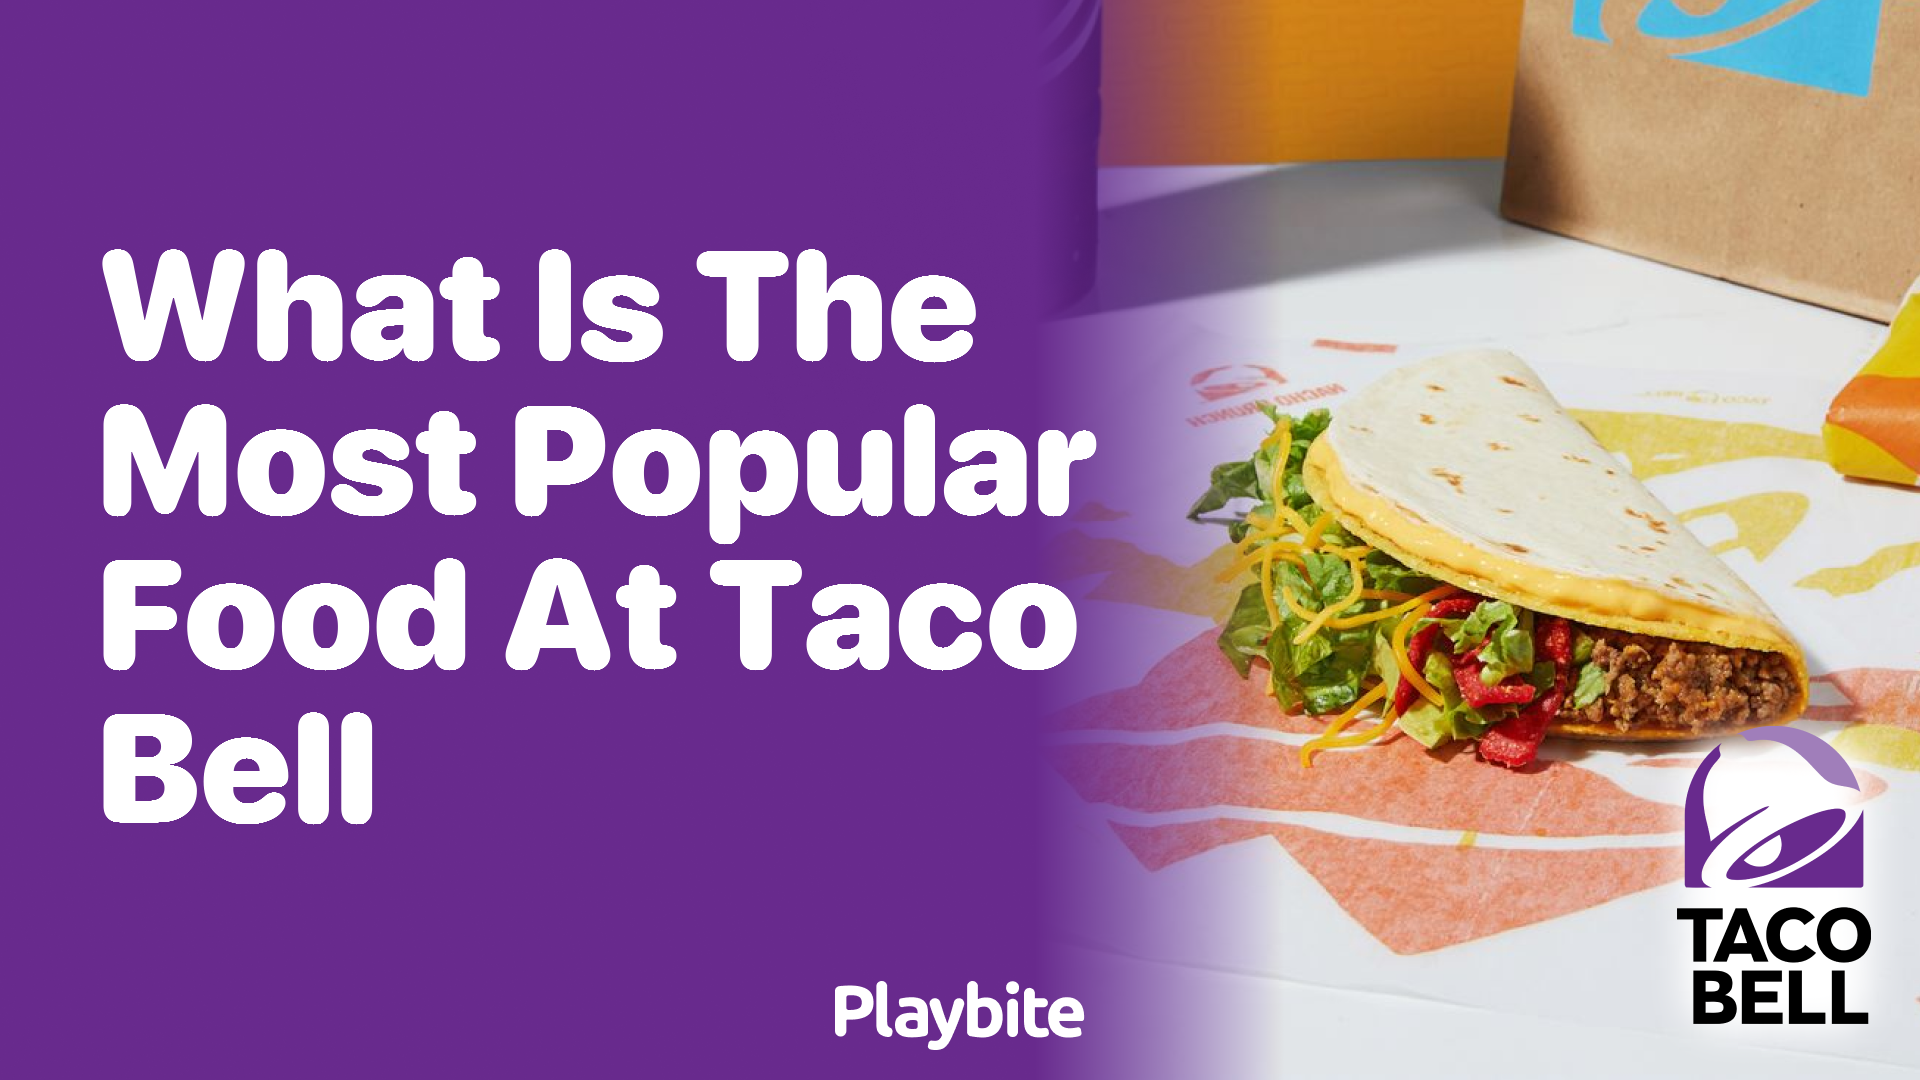 Discover the Most Popular Food at Taco Bell